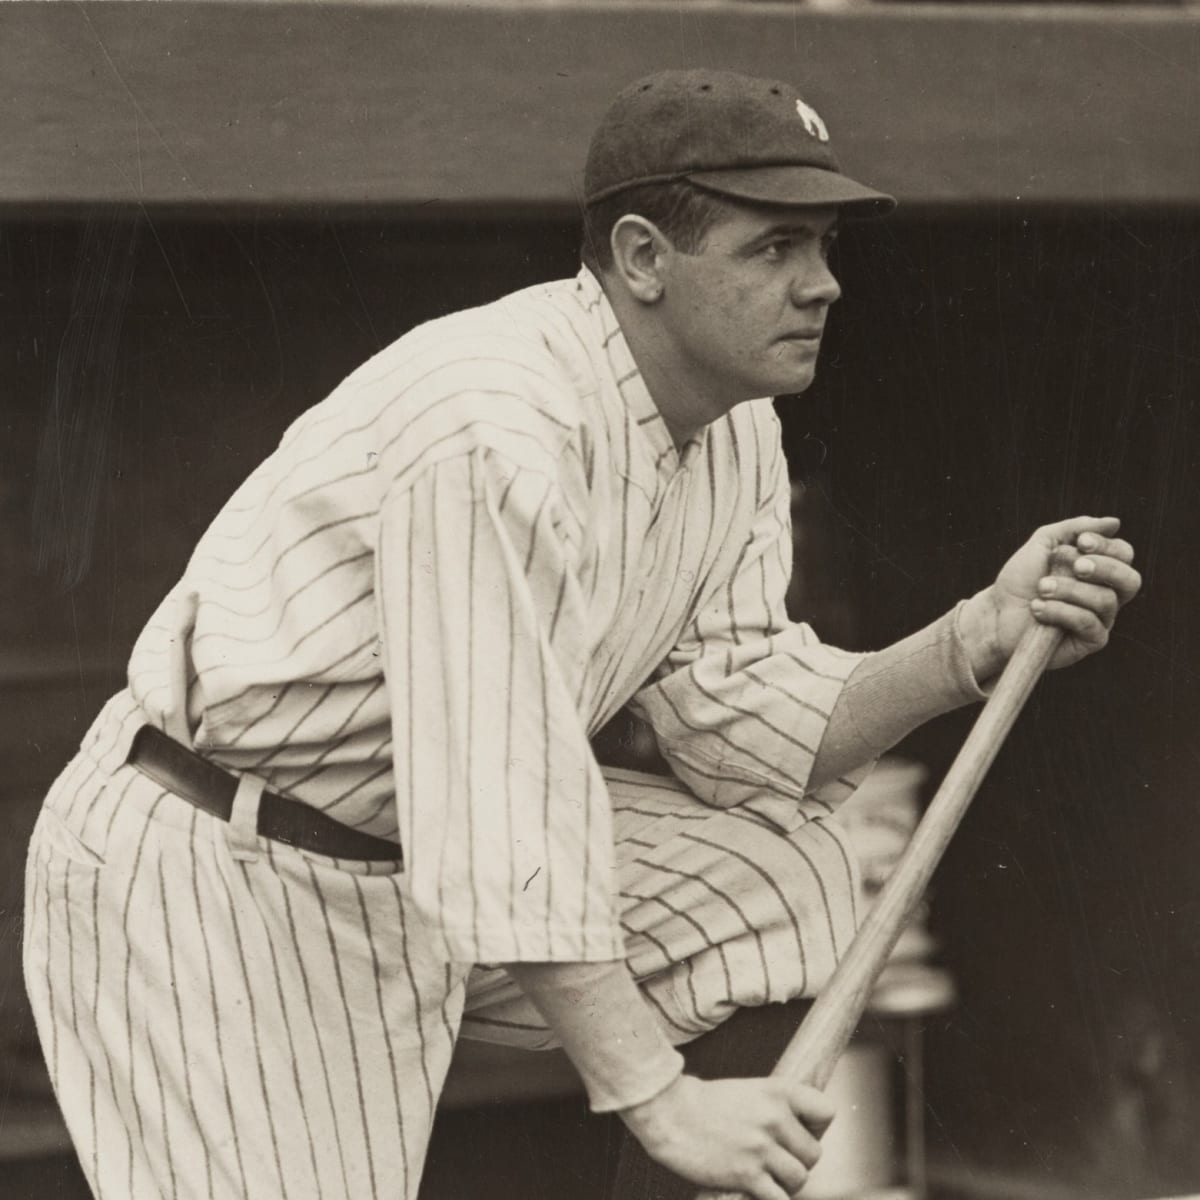 Today in Baseball History Babe Ruth Becomes 1st Player to Hit 500 Home Runs